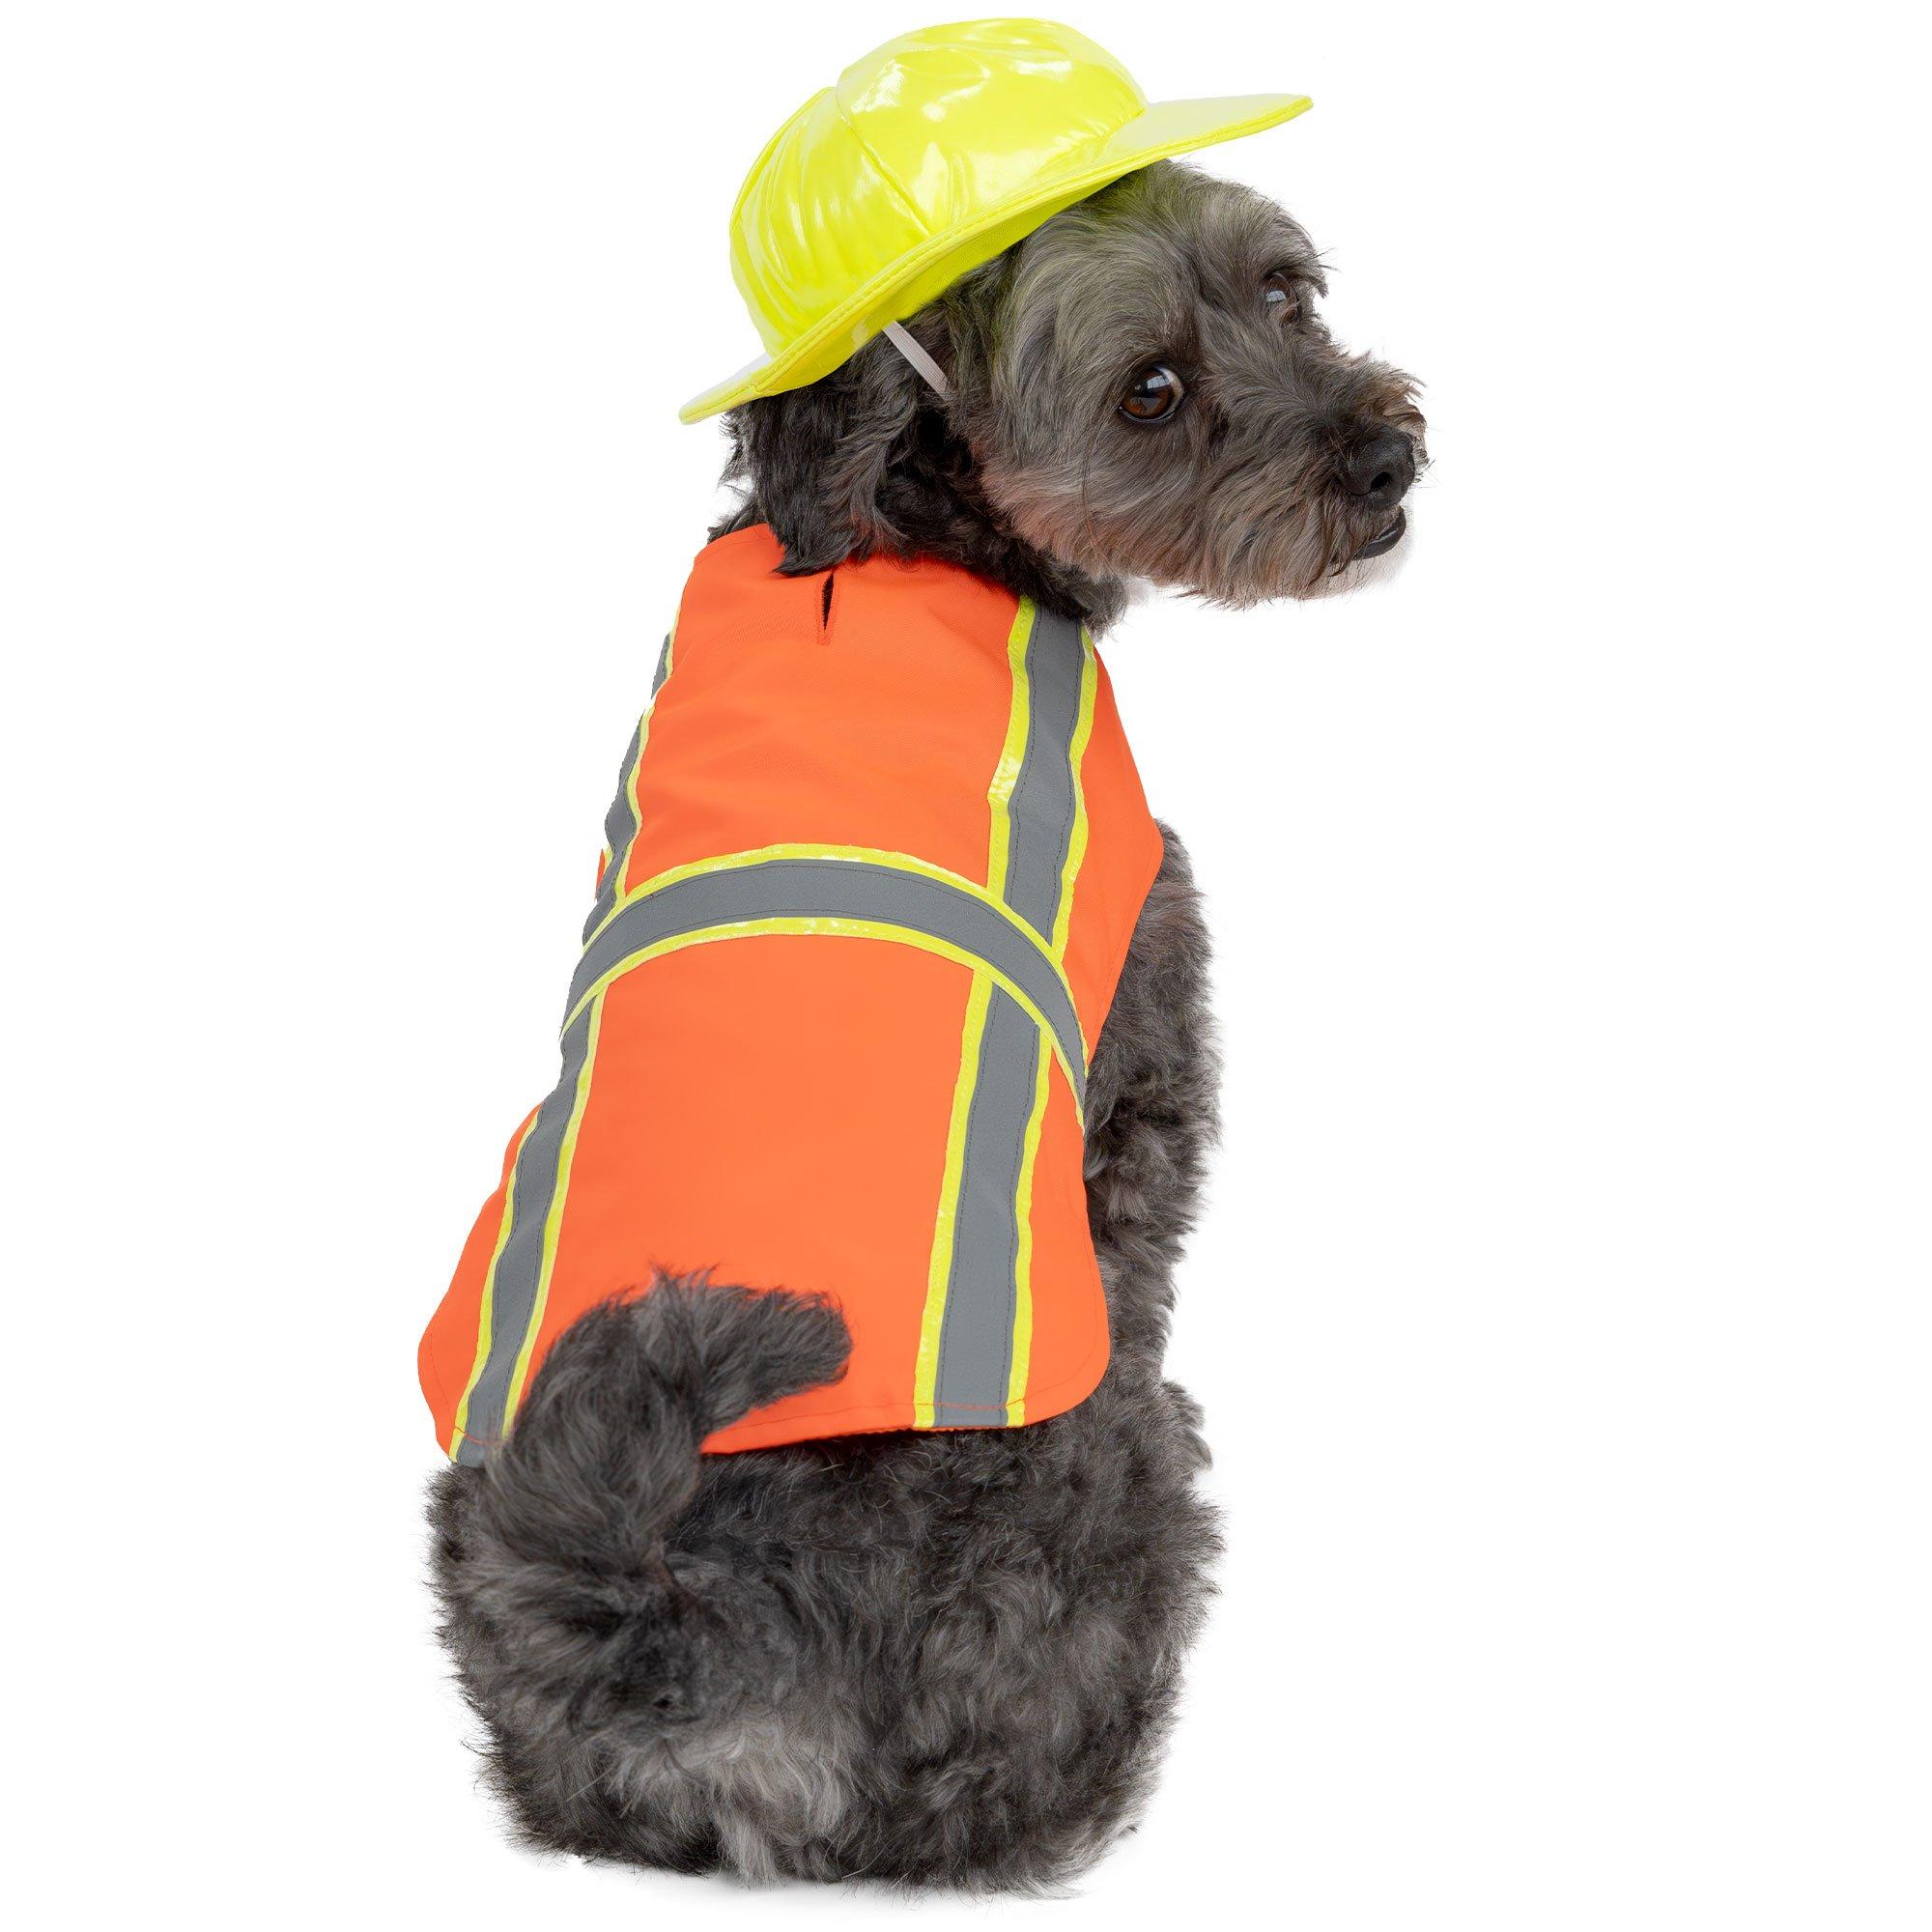 Construction Worker Dog Costume